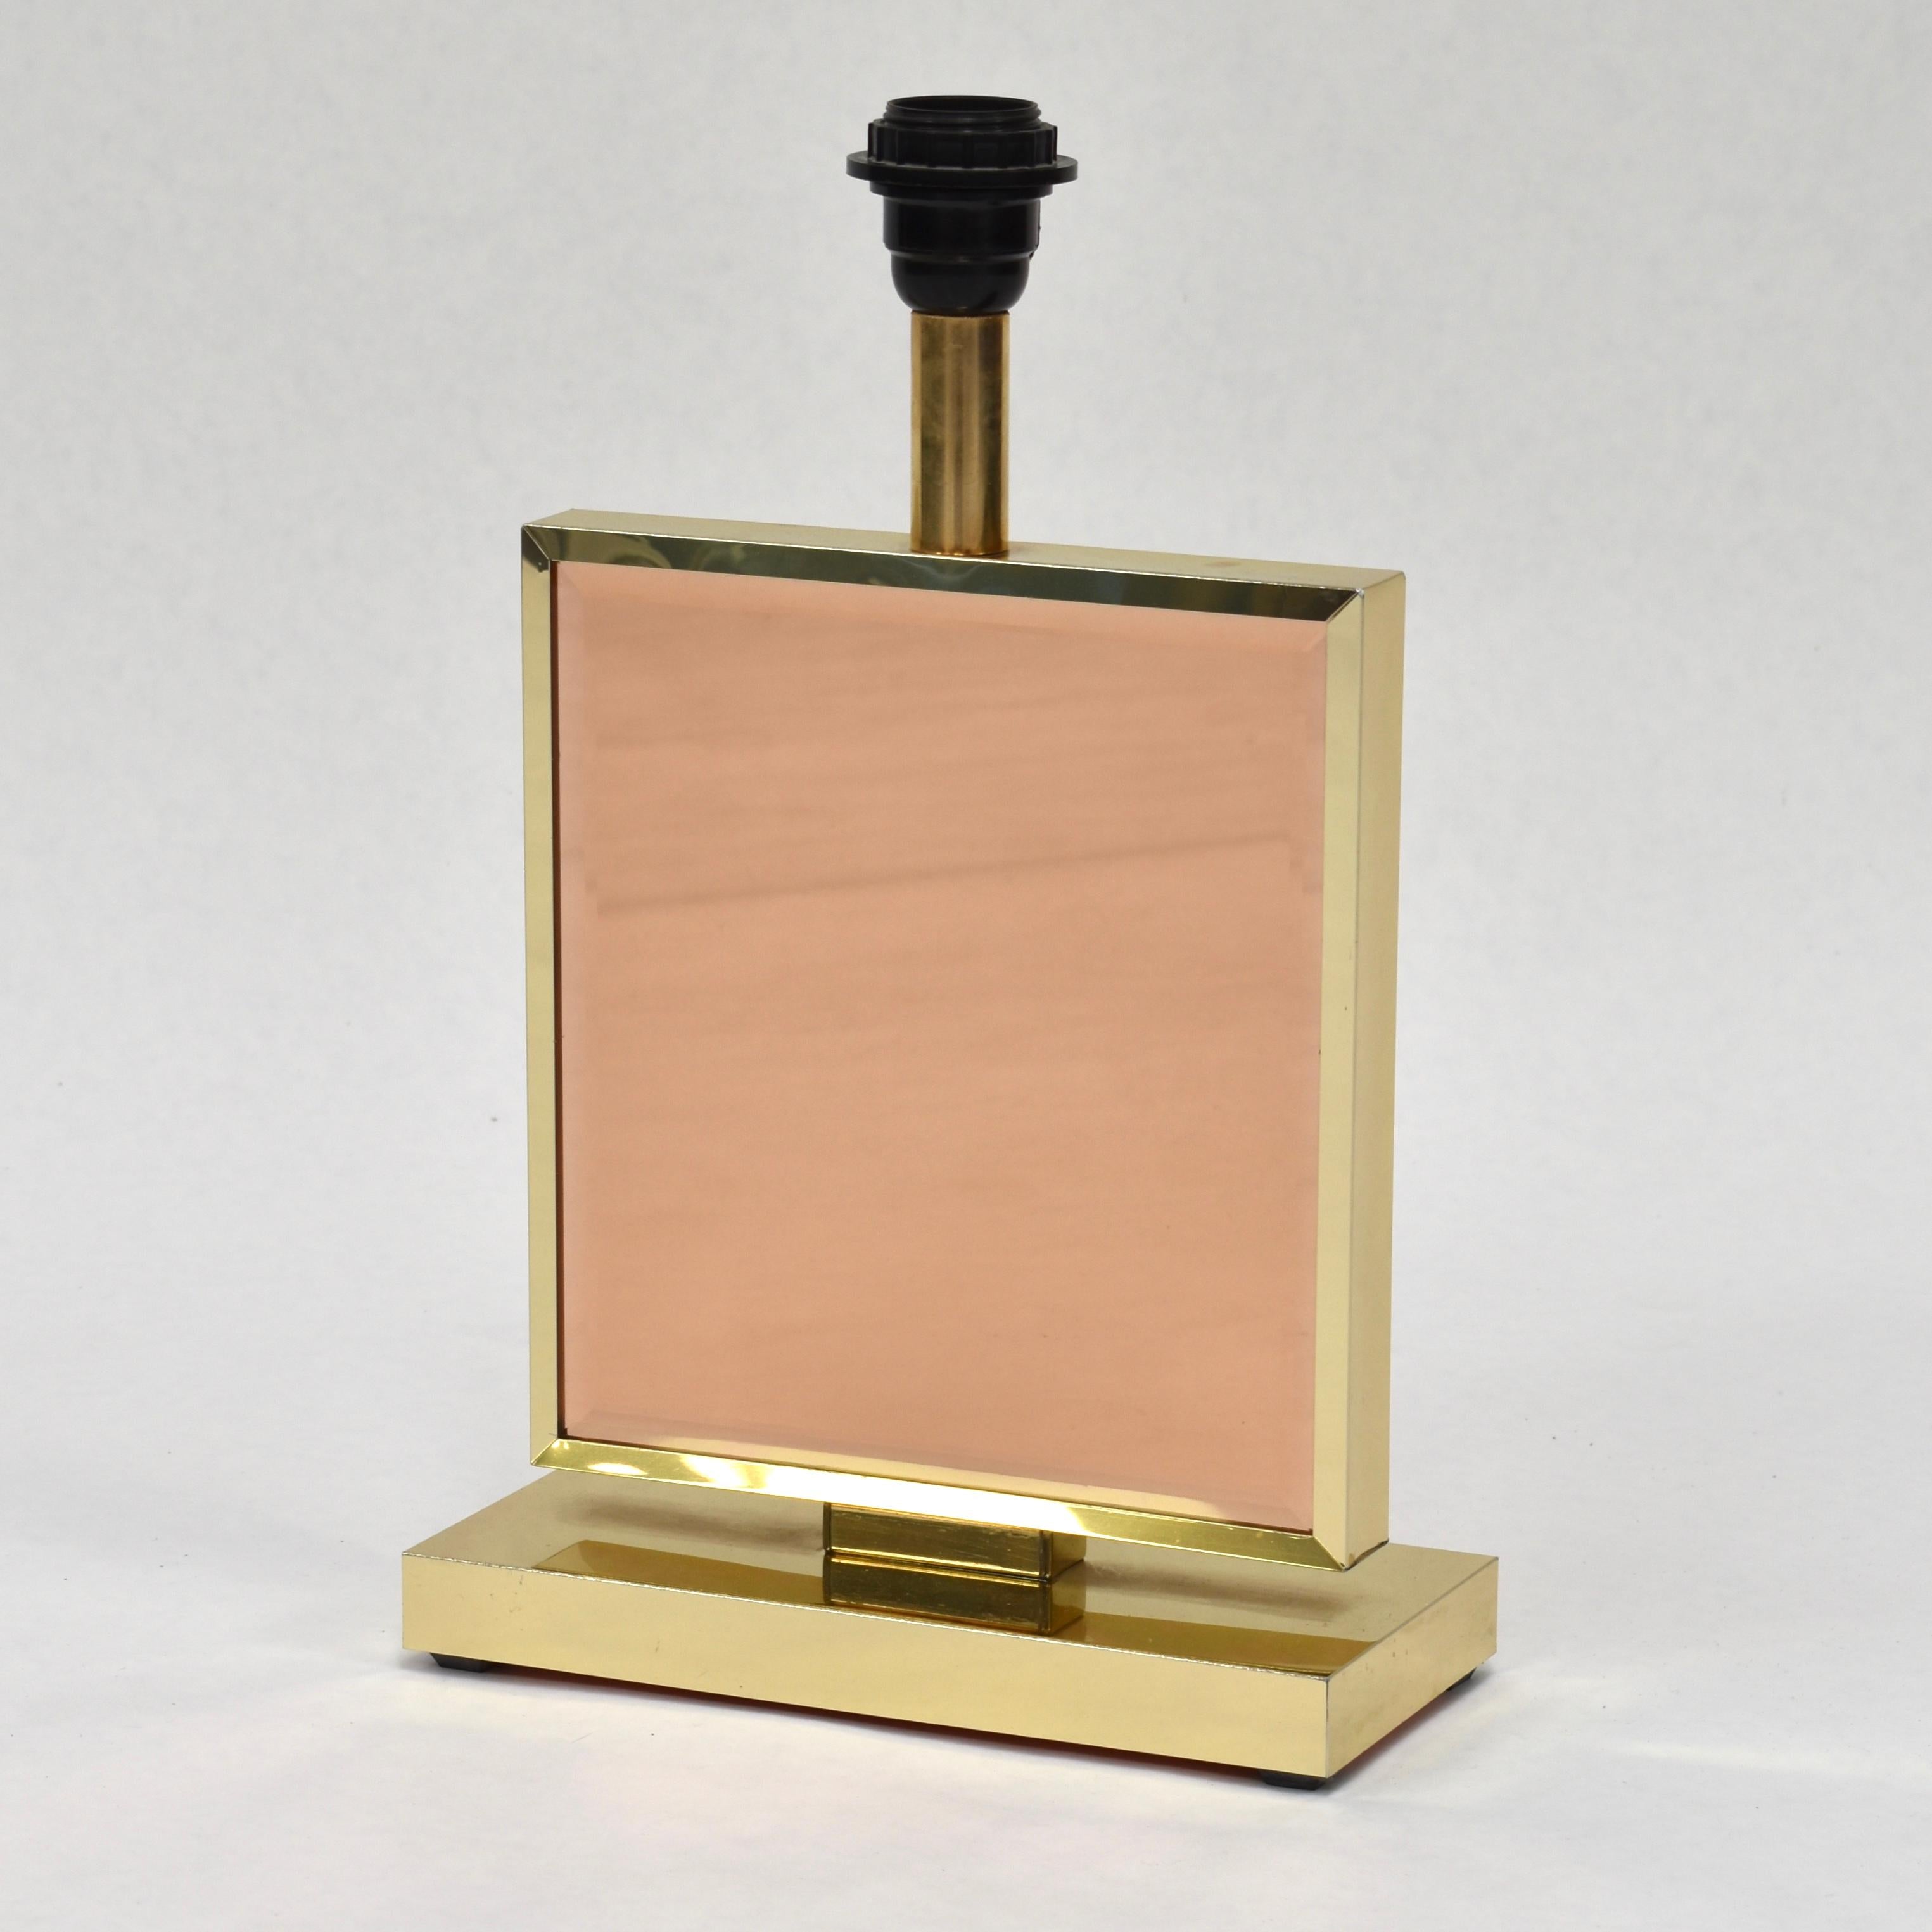 Hollywood Regency style table lamp in brass and salmon colored mirror glass. The edges of the glass are beautifully cut.

Designer: in the style of Willy Rizzo

Manufacturer: Unknown

Country: Italy or France

Model: table lamp

Material: